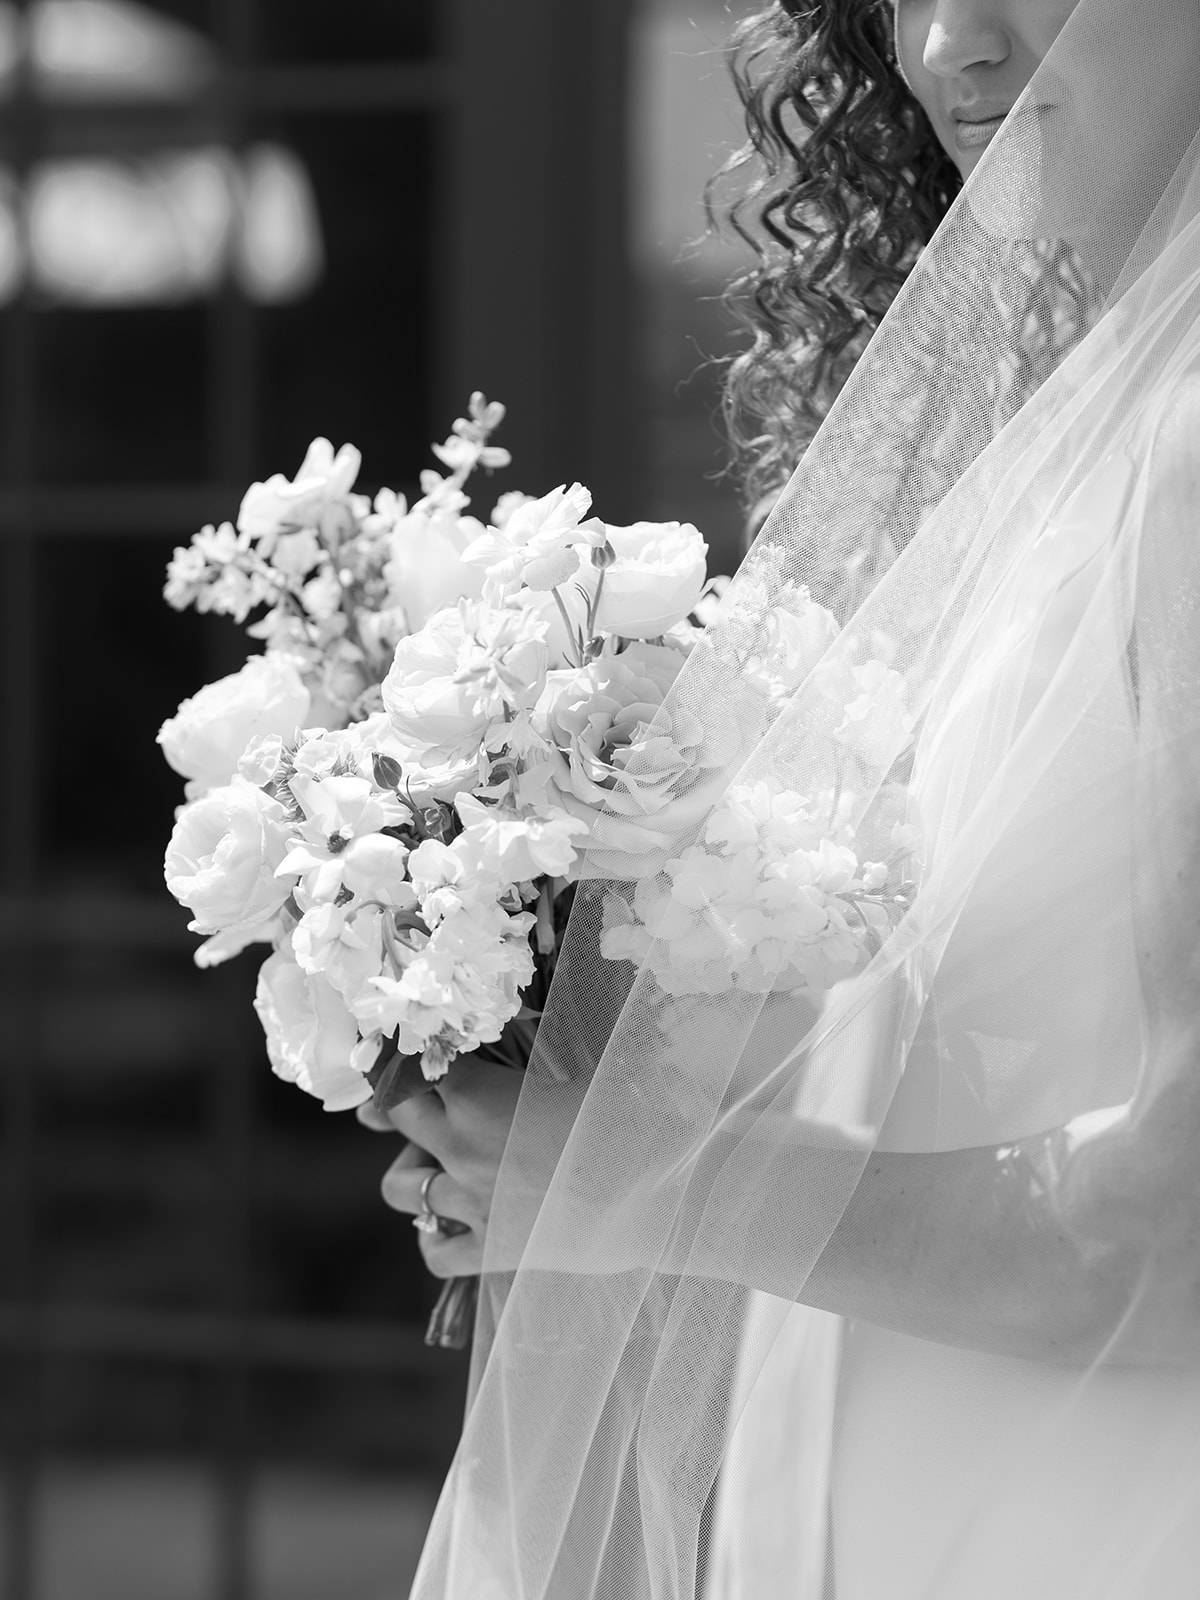 Black and white photo of a bride holding a bouquet with her veil flowing over the flowers and her shoulder.